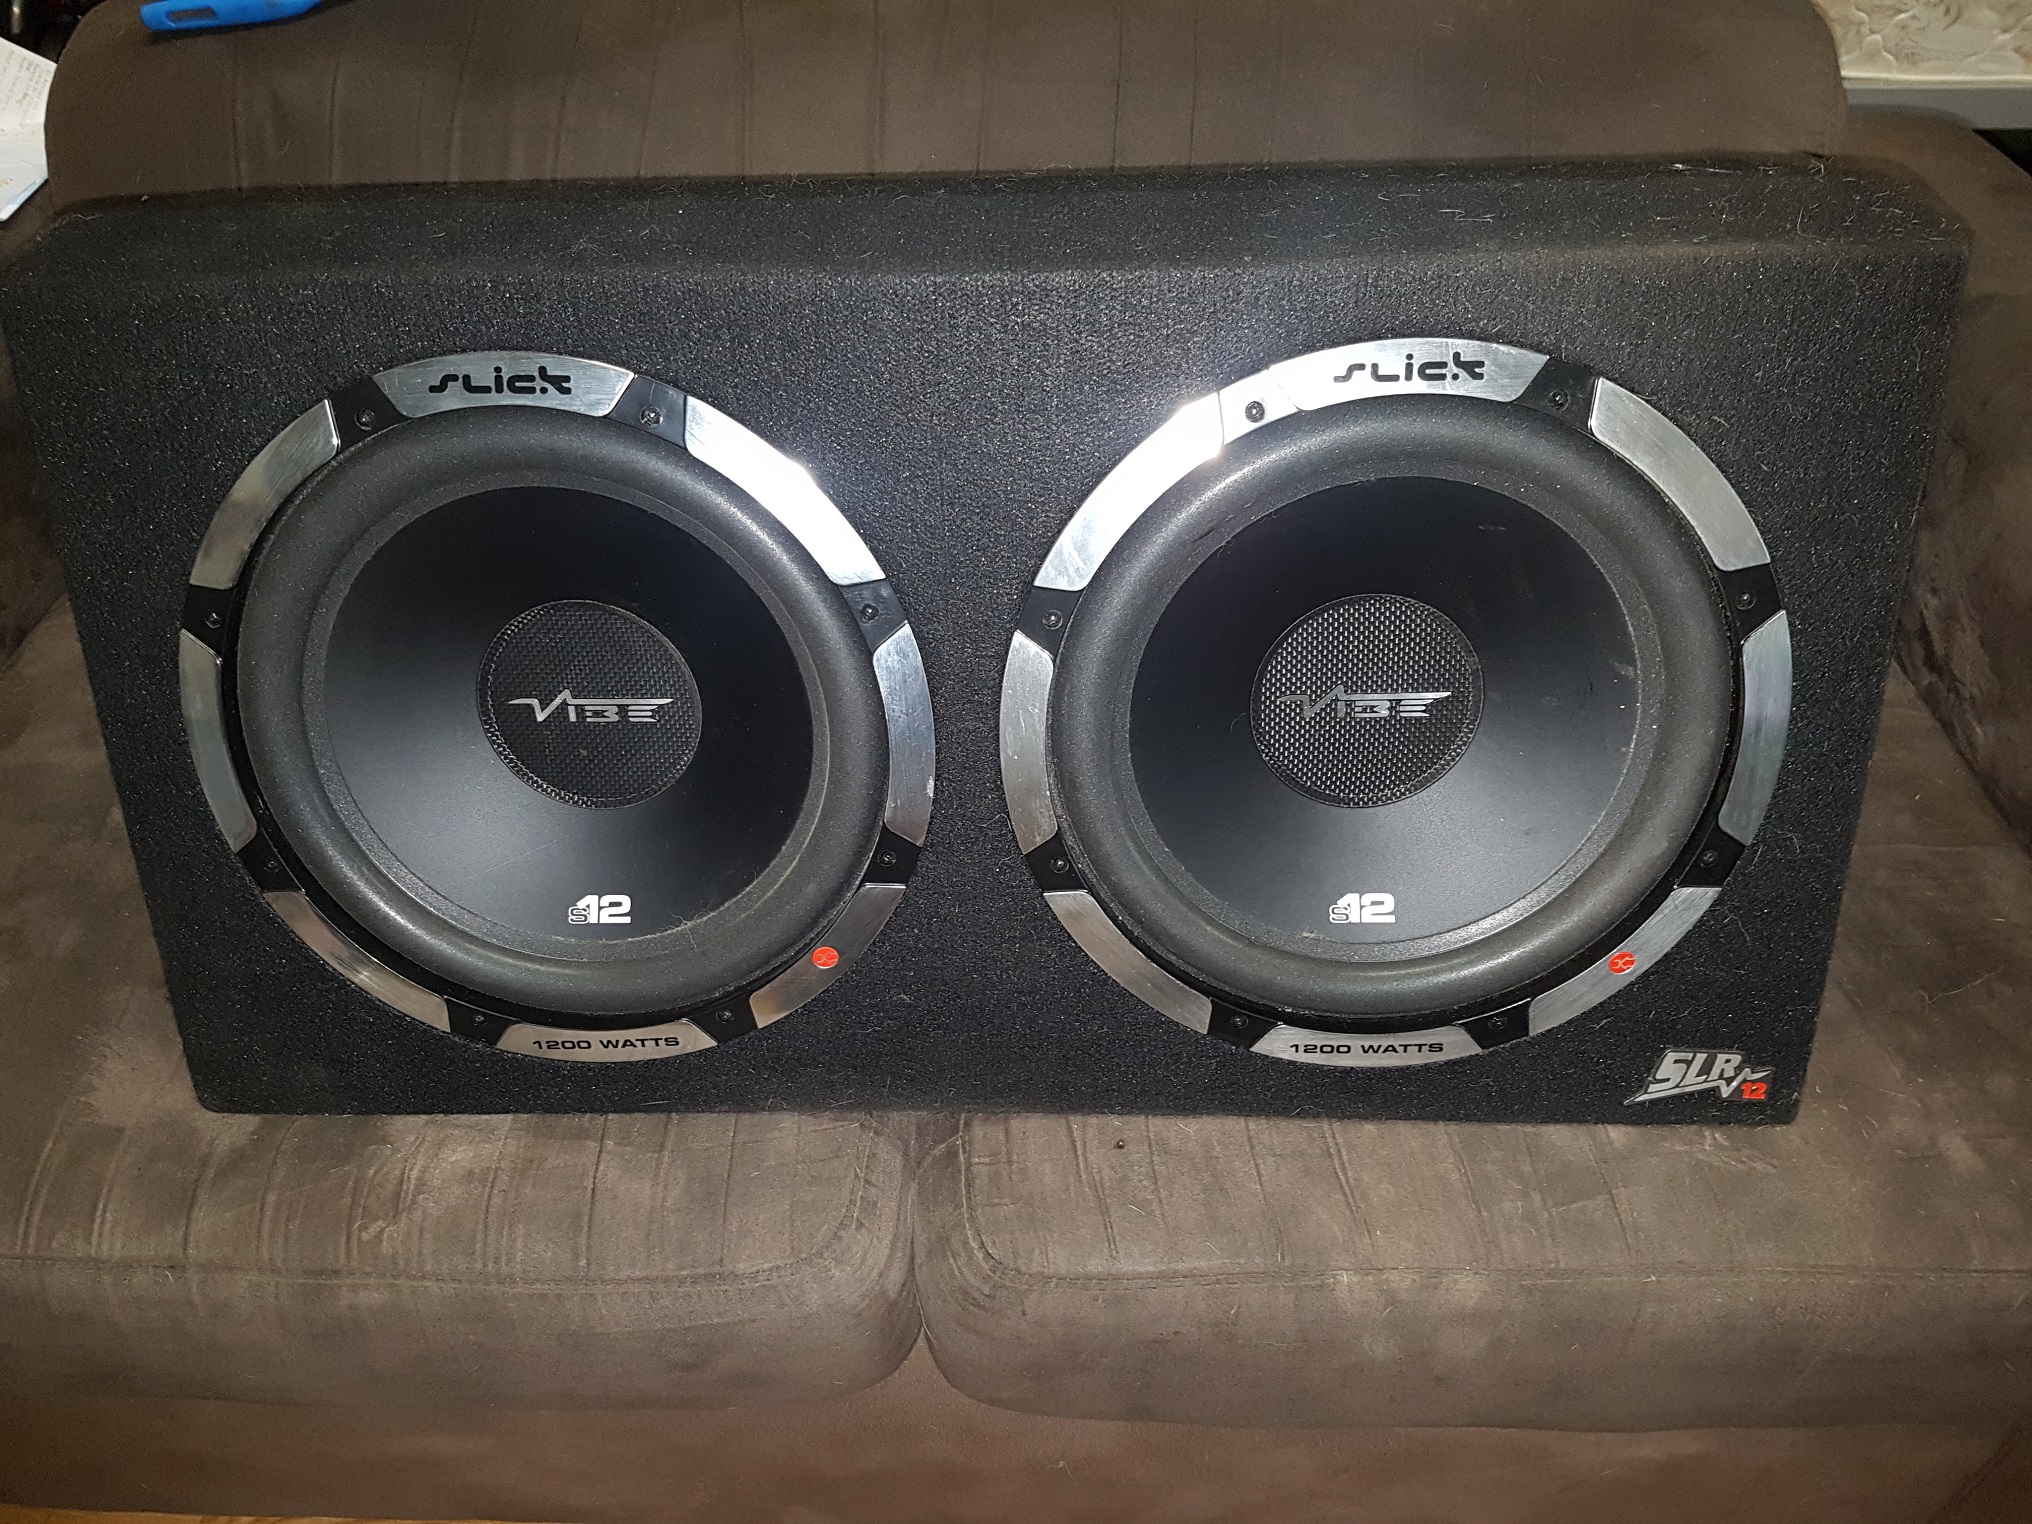 VIBE Slick 12IN, 2400w SUB Woofers In Box With Built In AMP. VGC